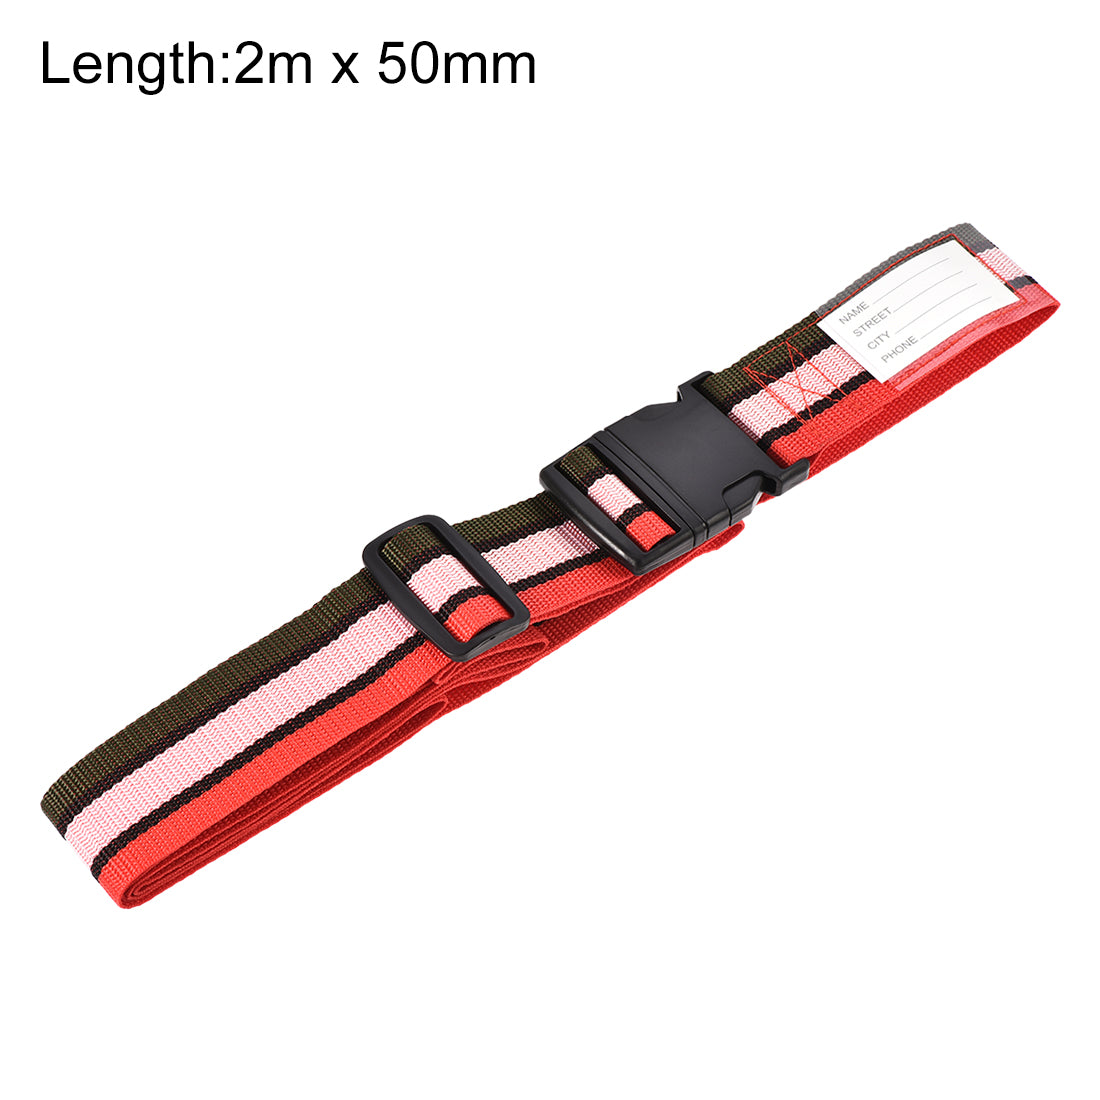 uxcell Uxcell Luggage Strap Suitcase Belt with Buckle Label, 2Mx5cm Adjustable PP Travel Bag Packing Accessory, Multi Color (Red Pink Dark Green)